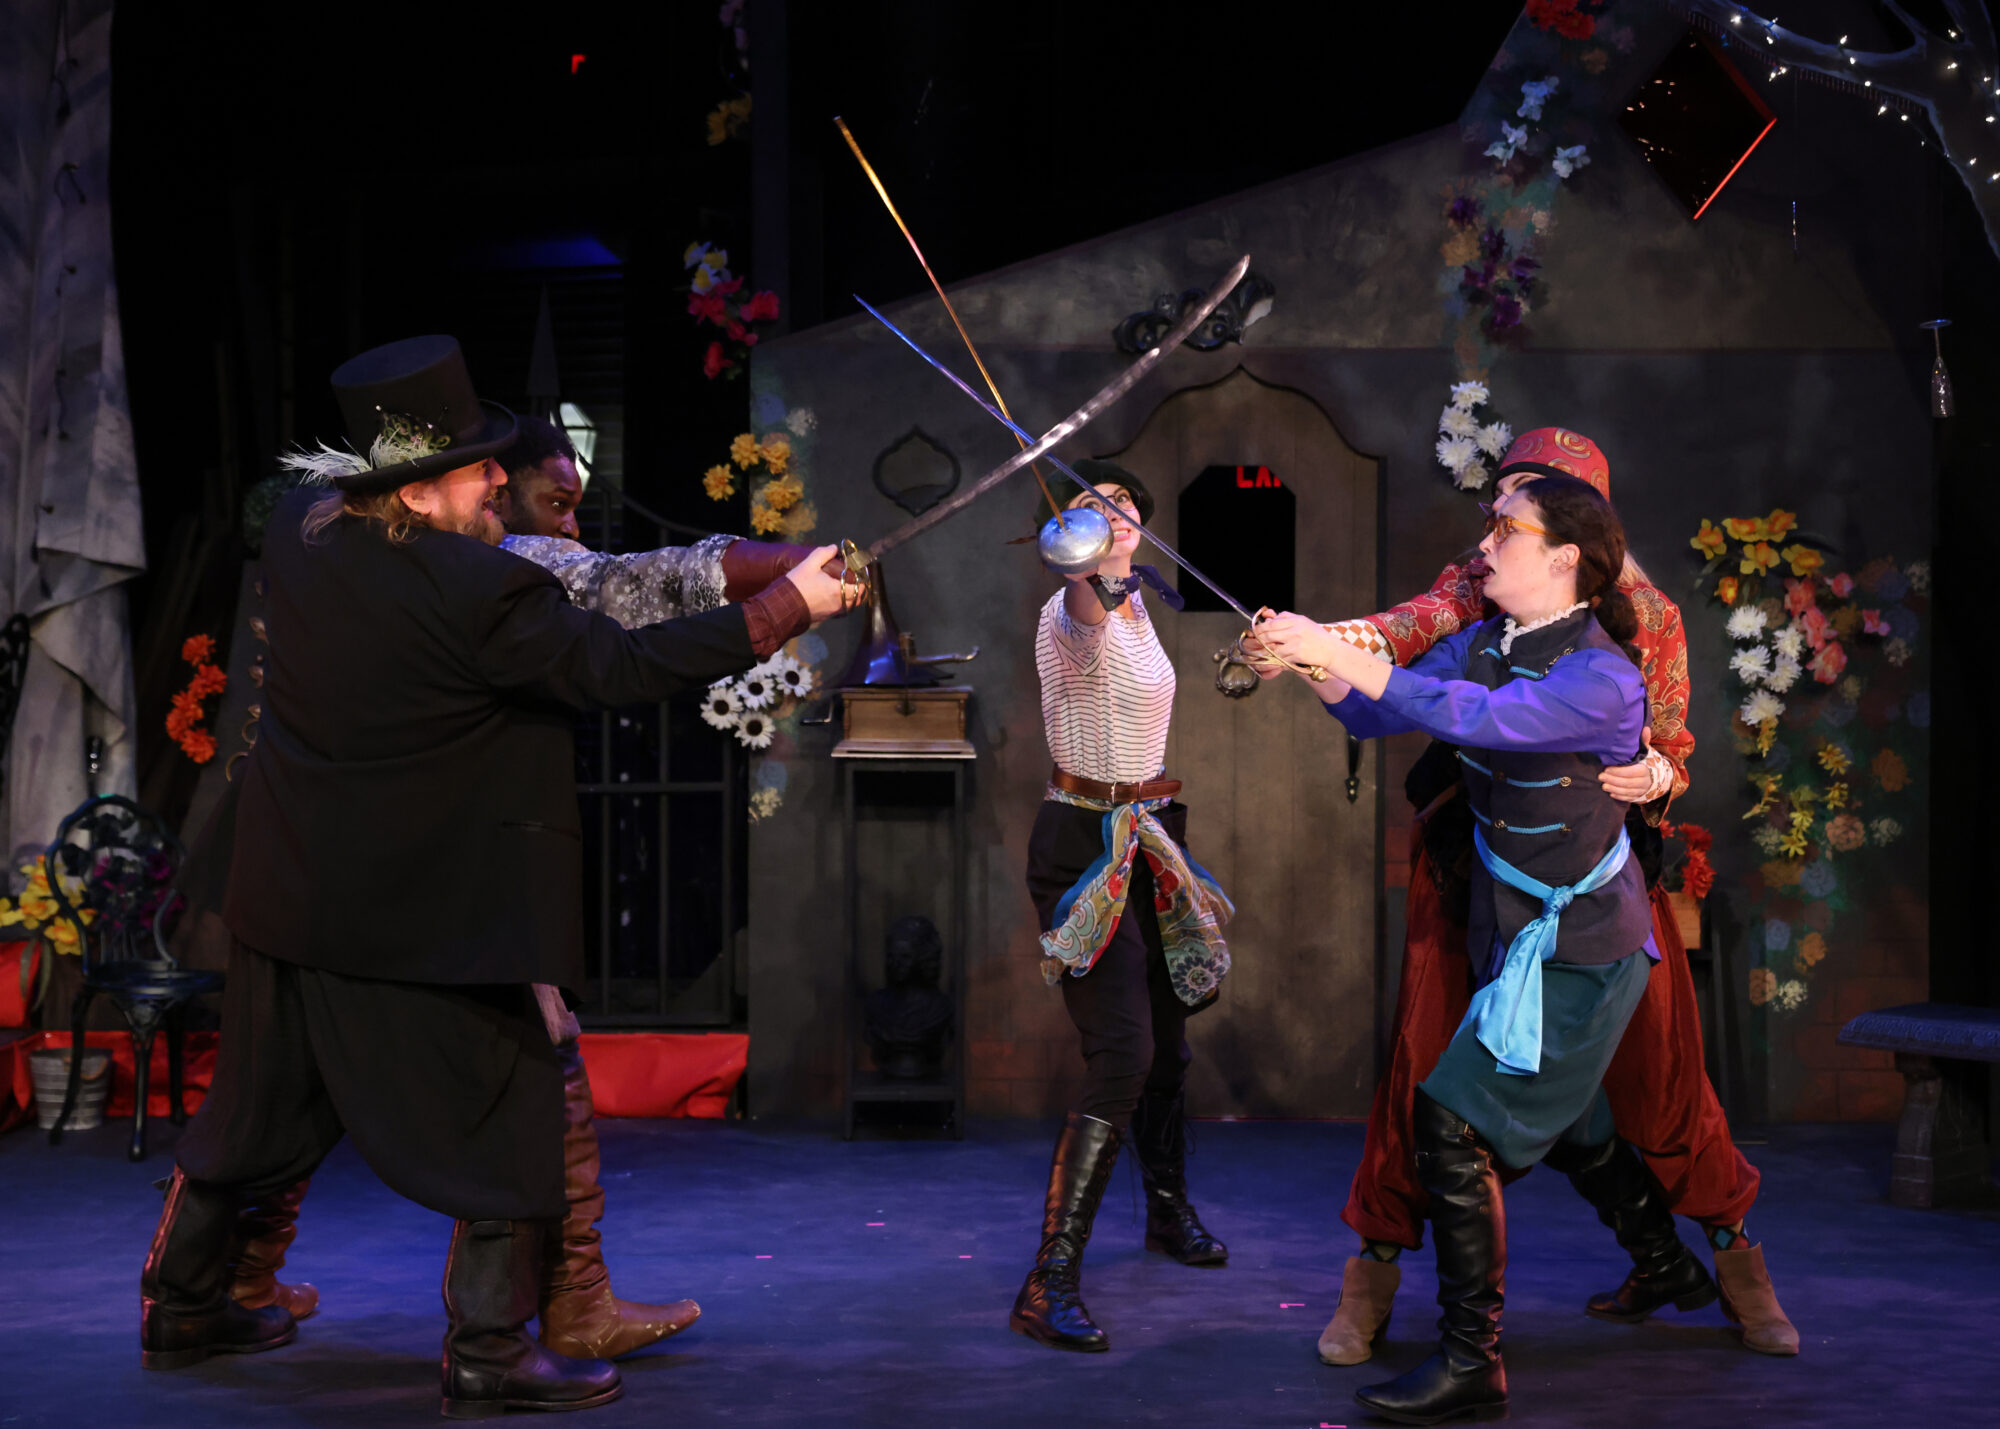 Review: The Warehouse Theatre’s 50th Season Opens on a High Note with “Twelfth Night”